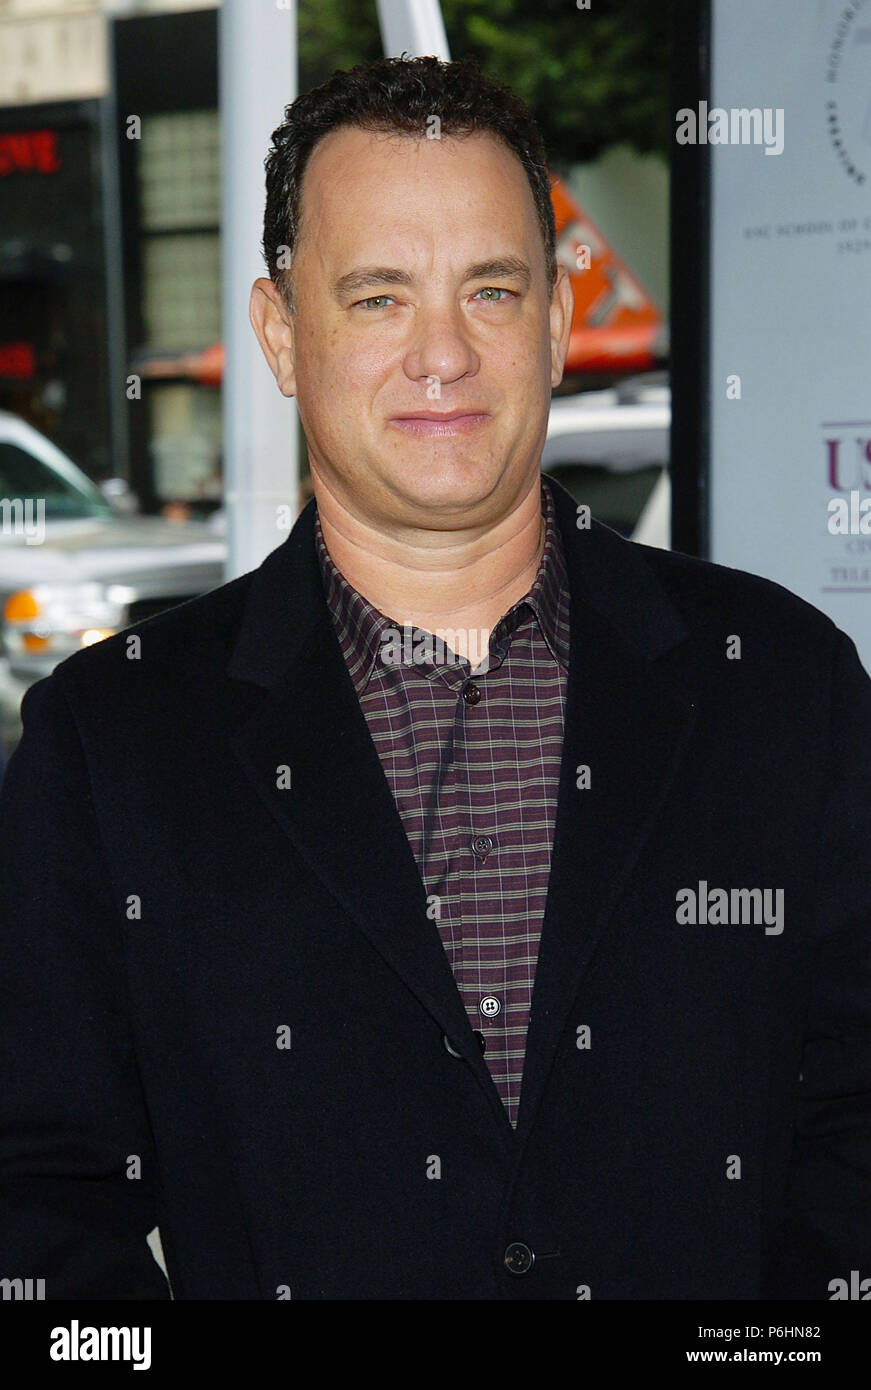 Tom Hanks arriving at the Polar Express Premiere at The Grauman Chinese Theatre in Los Angeles. 11/07/2004. 09-HanksTom090 Red Carpet Event, Vertical, USA, Film Industry, Celebrities,  Photography, Bestof, Arts Culture and Entertainment, Topix Celebrities fashion /  Vertical, Best of, Event in Hollywood Life - California,  Red Carpet and backstage, USA, Film Industry, Celebrities,  movie celebrities, TV celebrities, Music celebrities, Photography, Bestof, Arts Culture and Entertainment,  Topix, headshot, vertical, one person,, from the year , 2004, inquiry tsuni@Gamma-USA.com Stock Photo